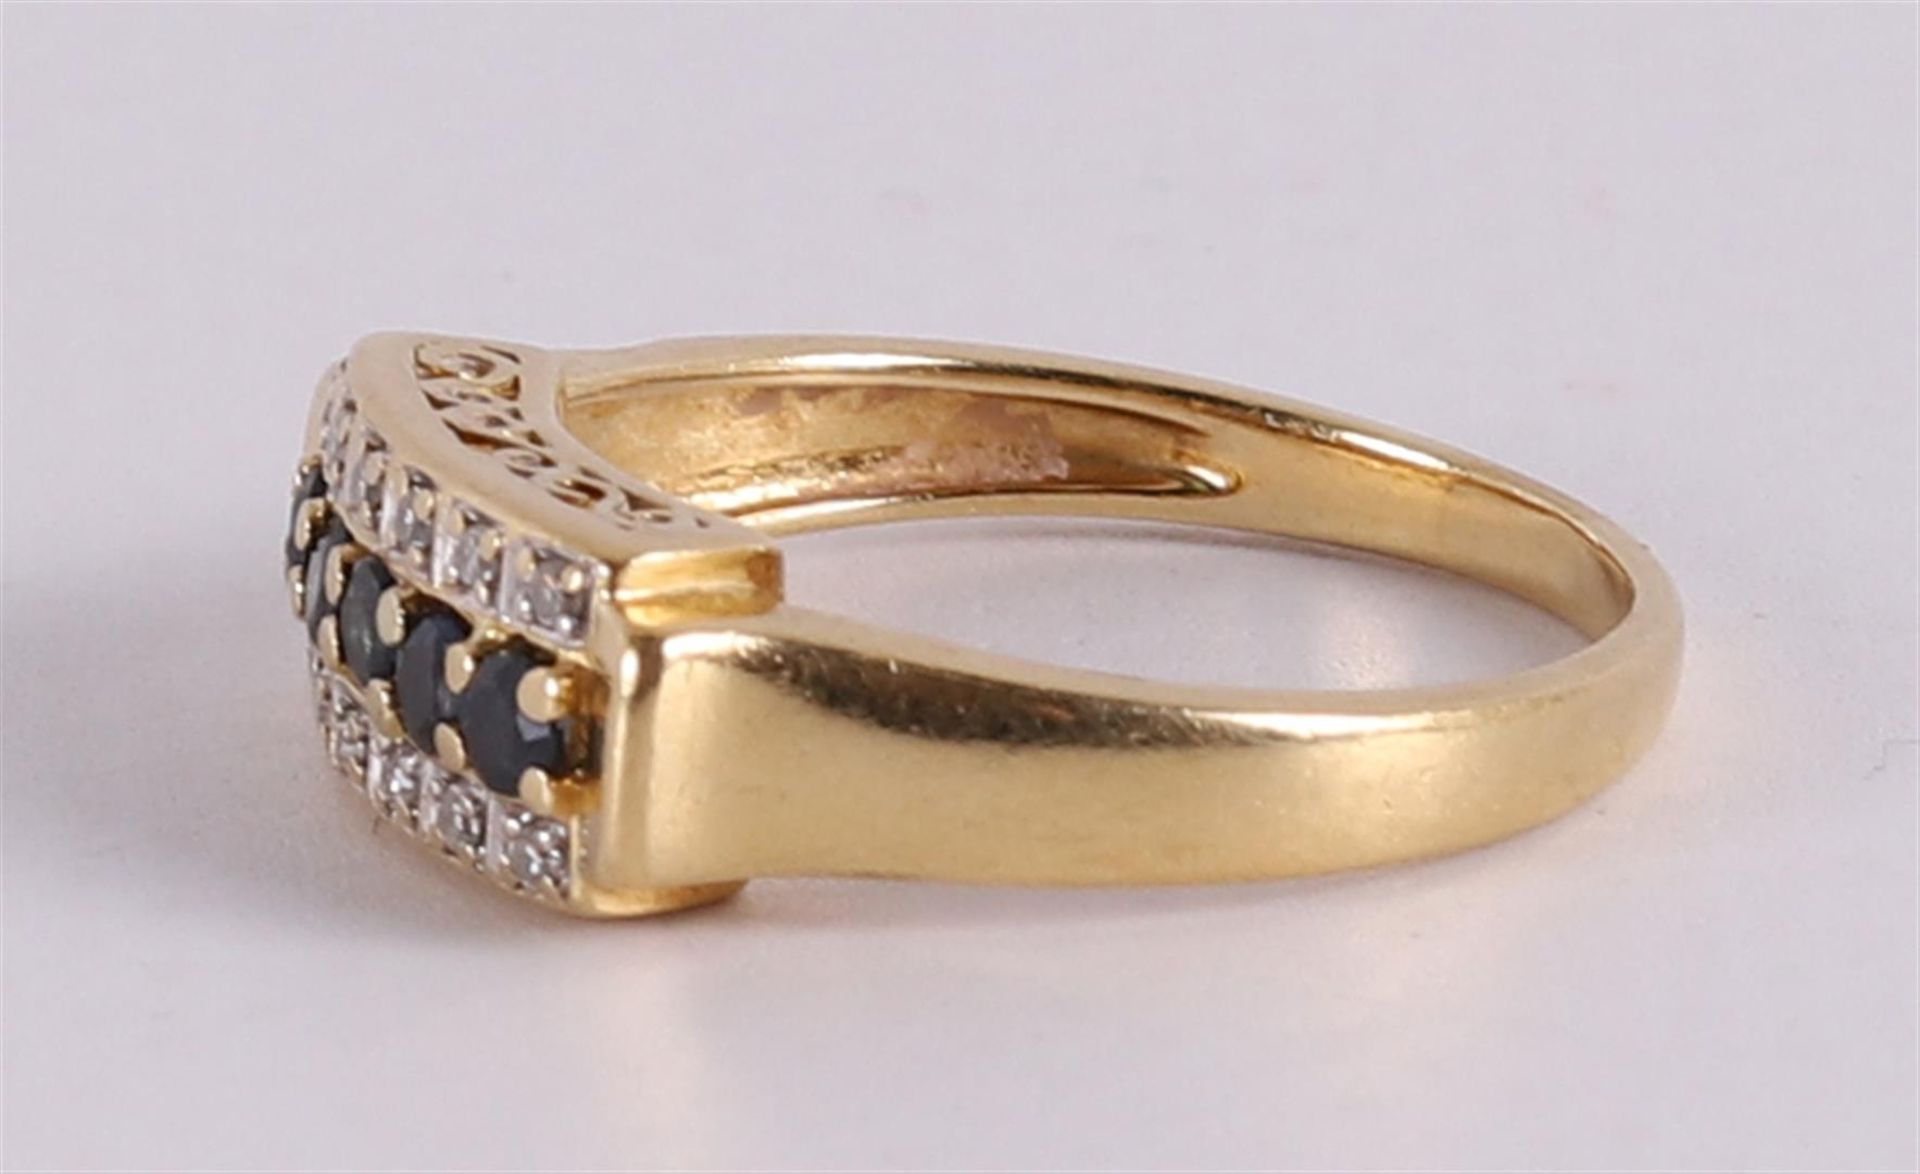 An 18 kt 750/1000 gold ring with 5 blue sapphires and 12 diamonds - Image 2 of 2